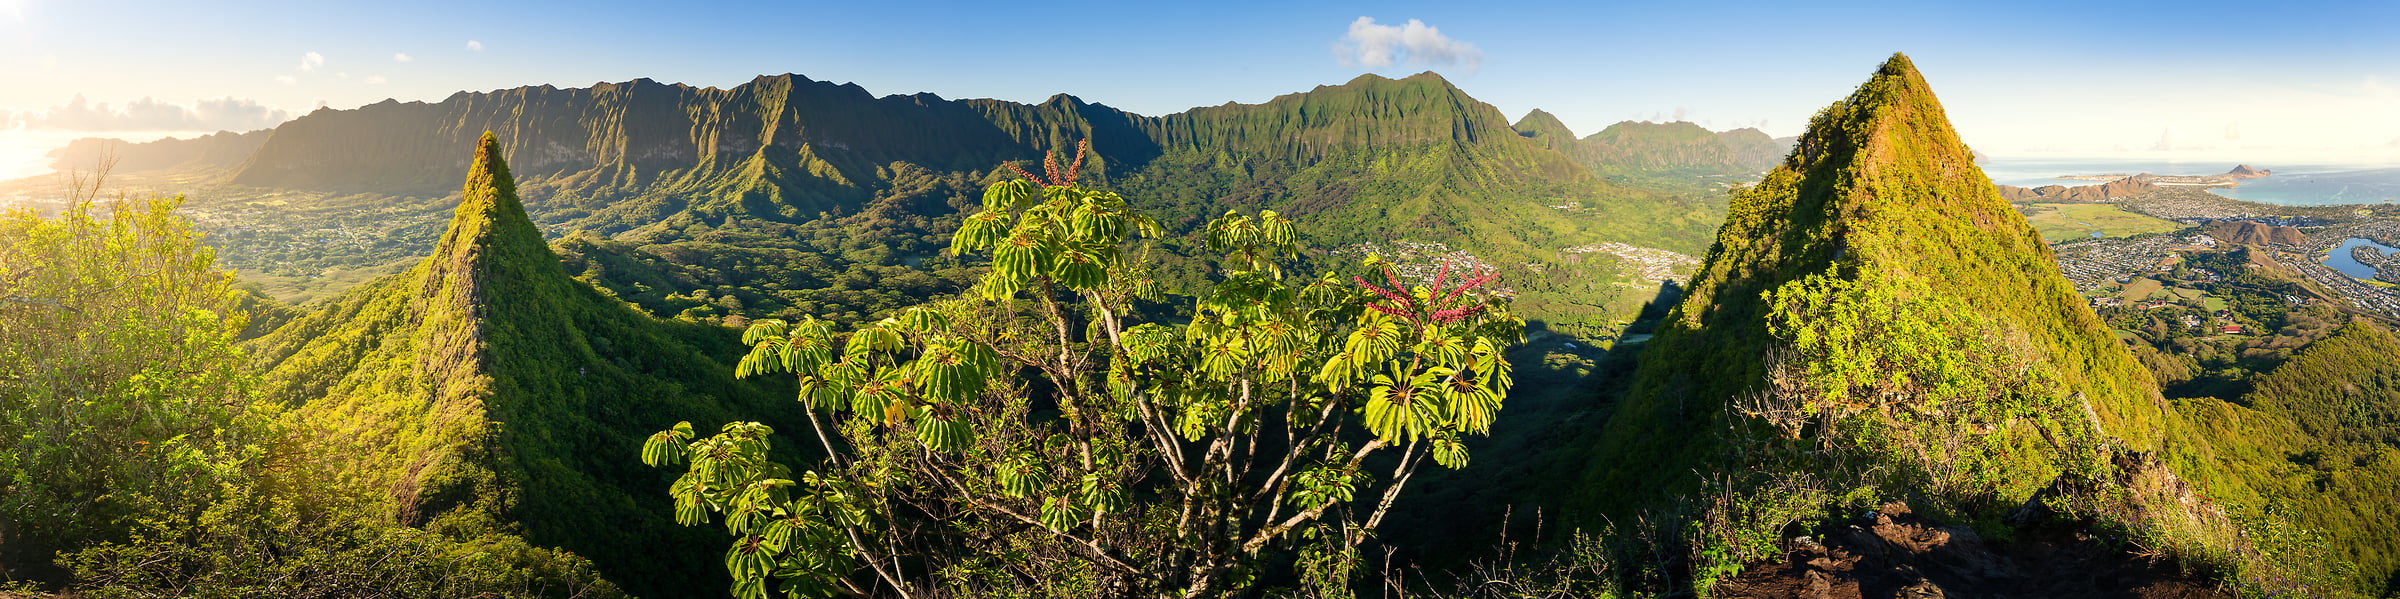 288 megapixels! A very high resolution, large-format VAST photo print of a Hawaii landscape; panorama photograph created by Jeff Lewis in Kaneohe, Hawaii.